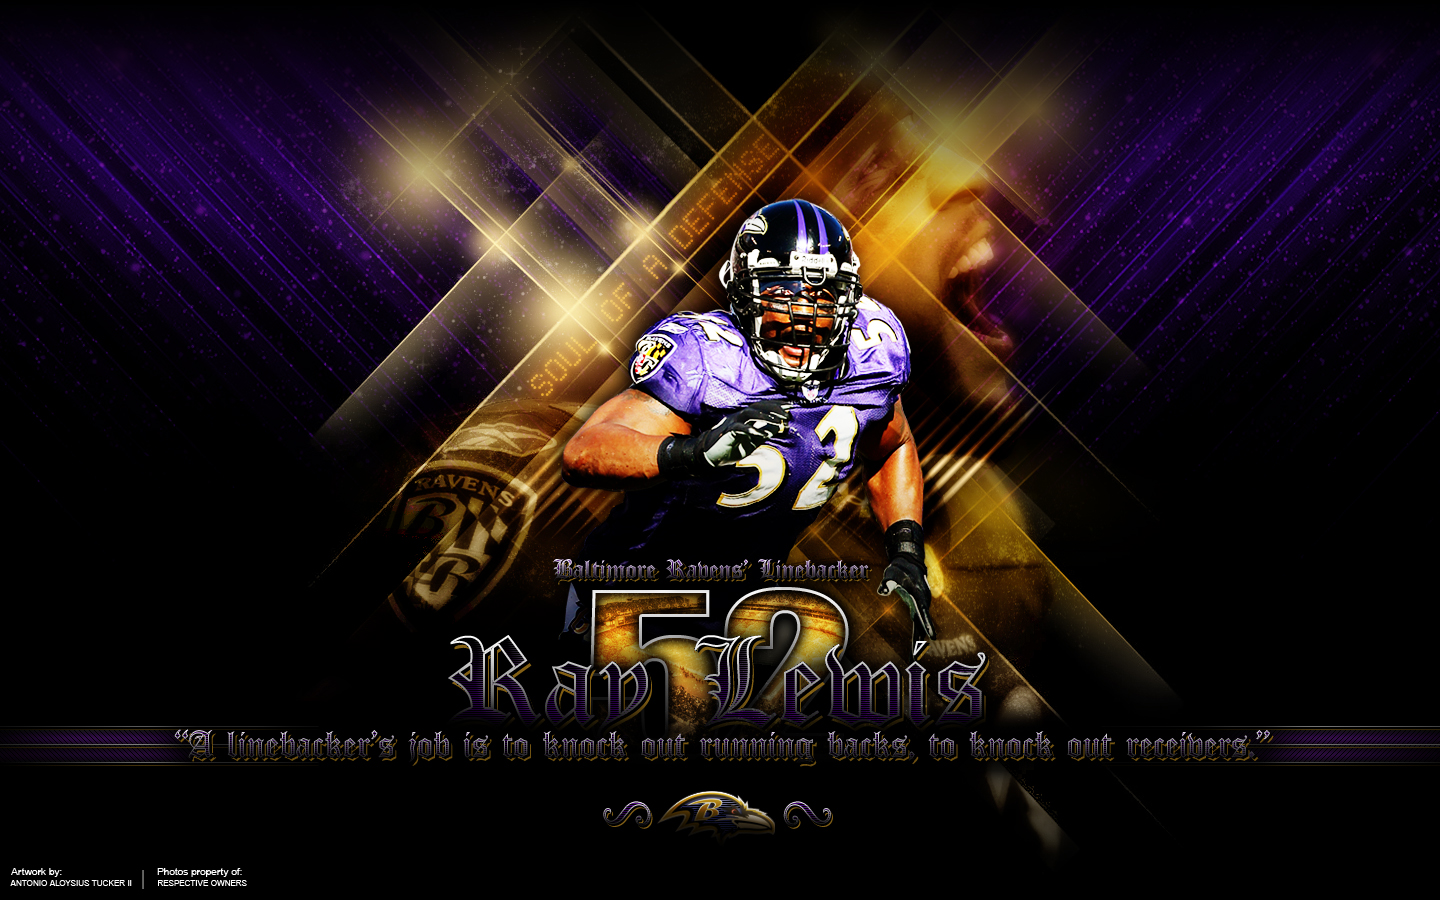 Baltimore Ravens Wallpaper Background..What More Could You Ask? :D ...